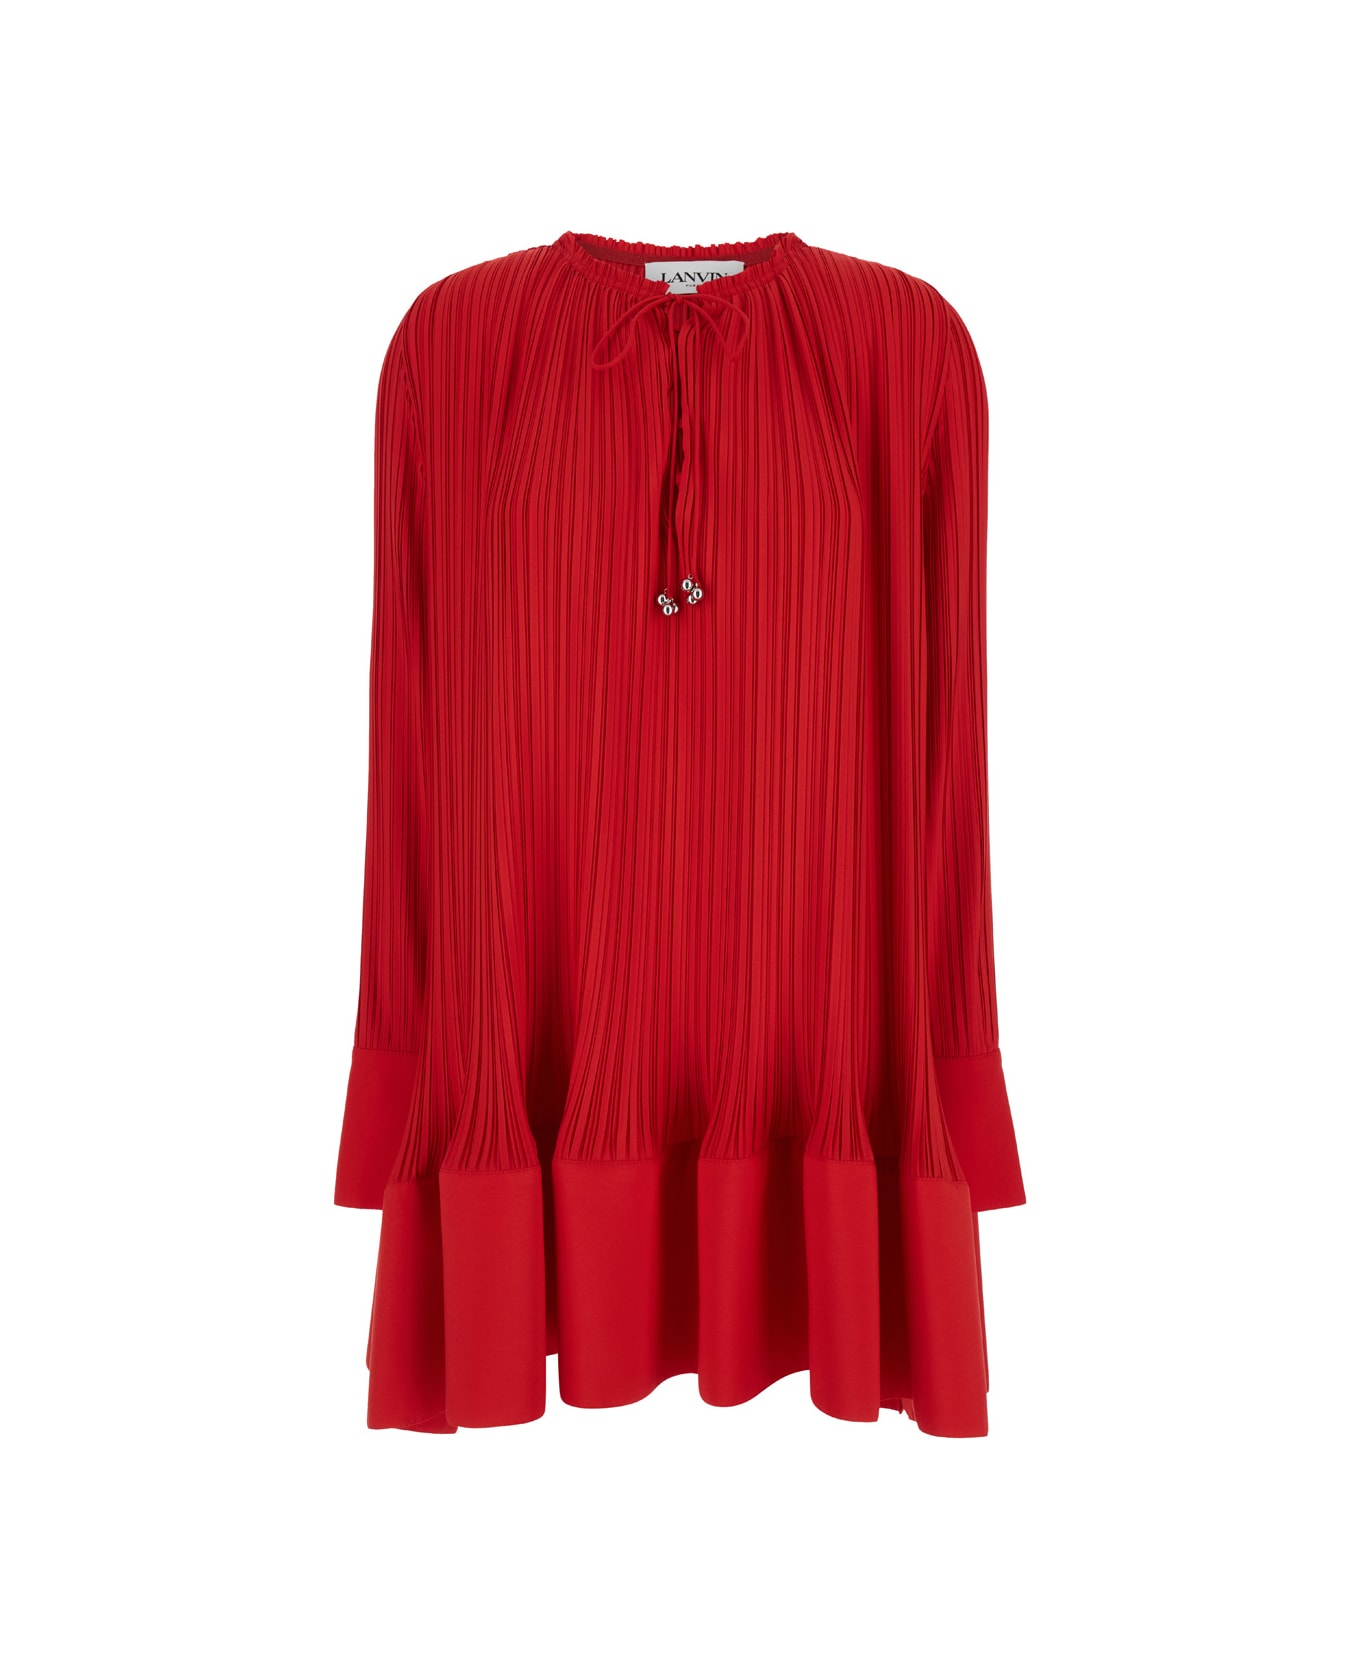 Lanvin Long Sleeve Flare Pleated Dress - Red